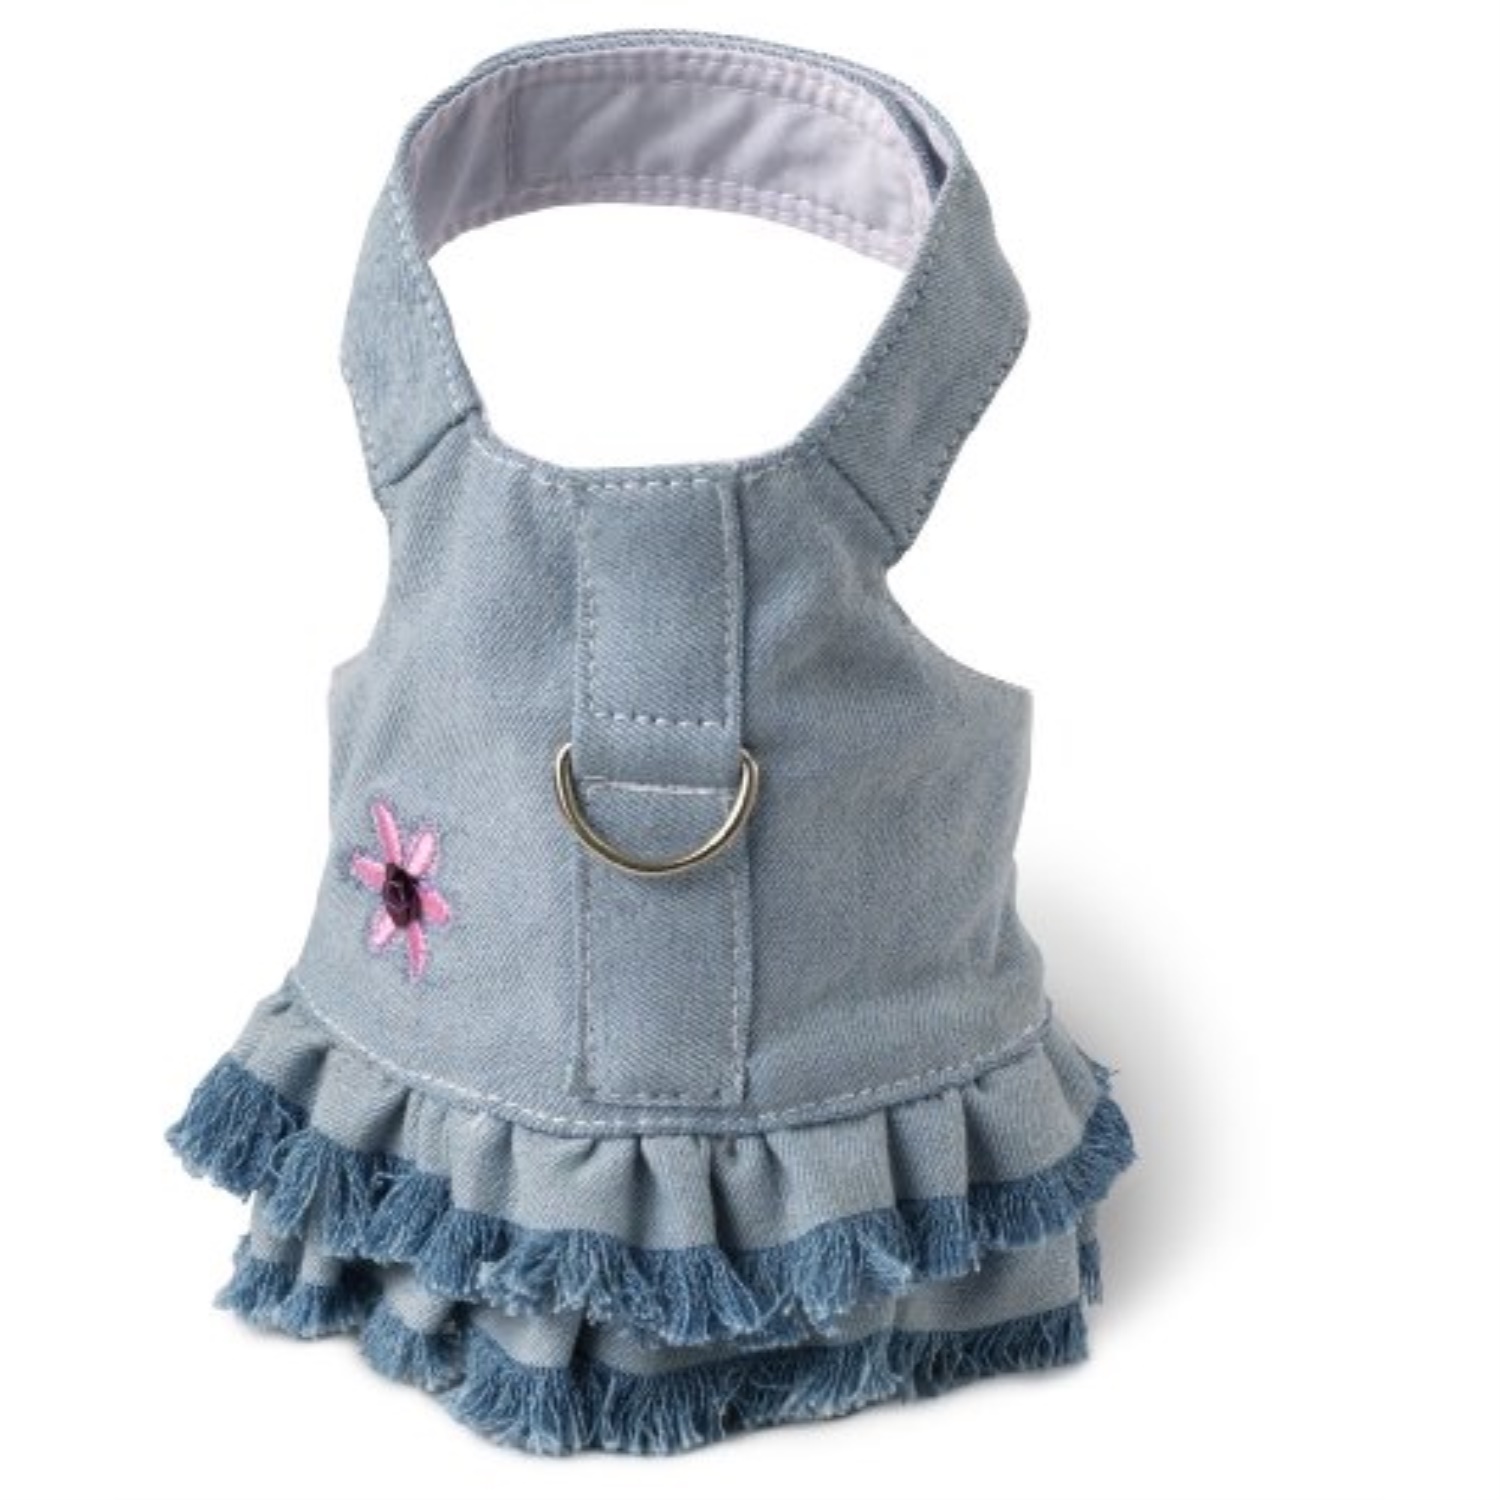 Doggles Dog Harness Dress with Jean Fringe, Blue, Small - image 1 of 2